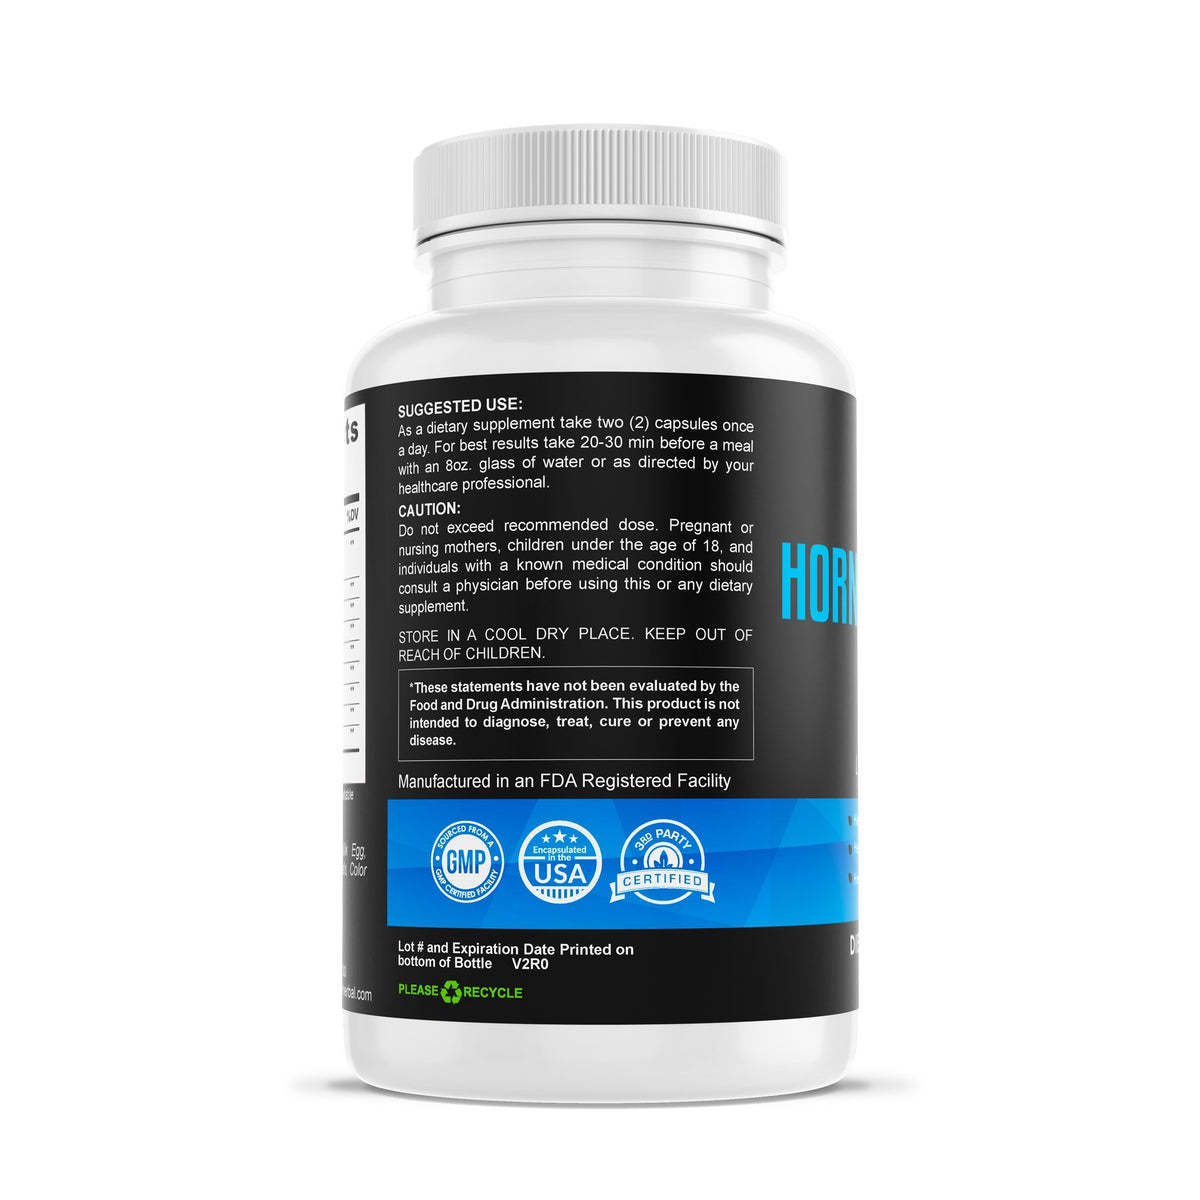 Horny Goat Weed Complex - Libido Formula Herbal Supplements Be Herbal®